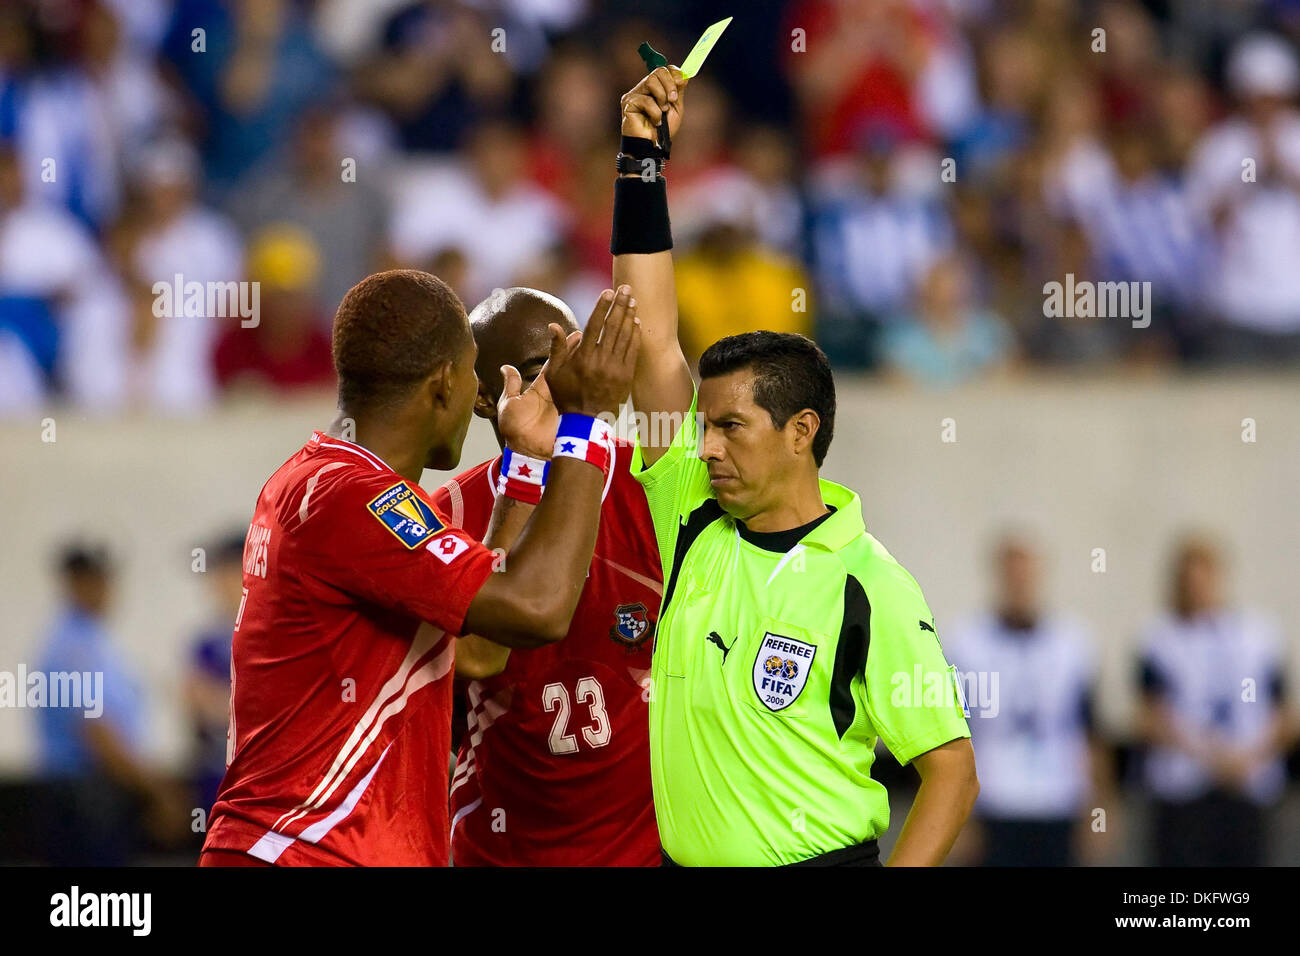 Jul 18, 2009 - Philadelphia, Pennsylvania, USA - ROMAN TORRES (5) pleads his case to Referee ARMANDO ARCHUNDIA to no avail for kicking United States' attacker KENNY COOPER (17), which will lead to a yellow card, a penalty kick, and the game winning goal, during the CONCACAF Gold Cup quarter finals match between United States and Panama at Lincoln Financial Field in Philadelphia, Pe Stock Photo